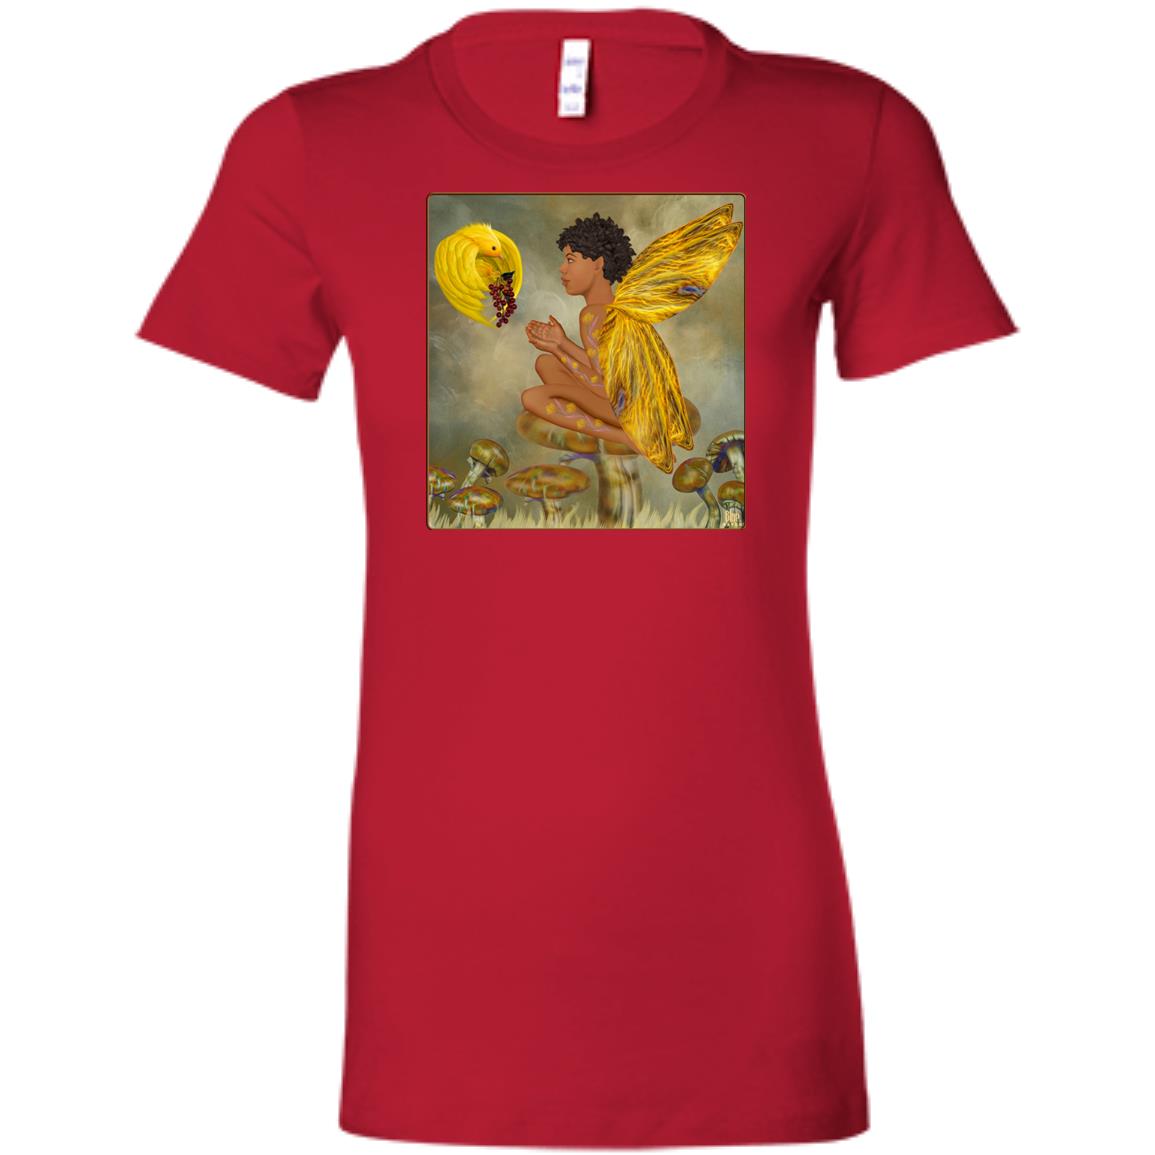 Sharing - Women's Fitted T-Shirt